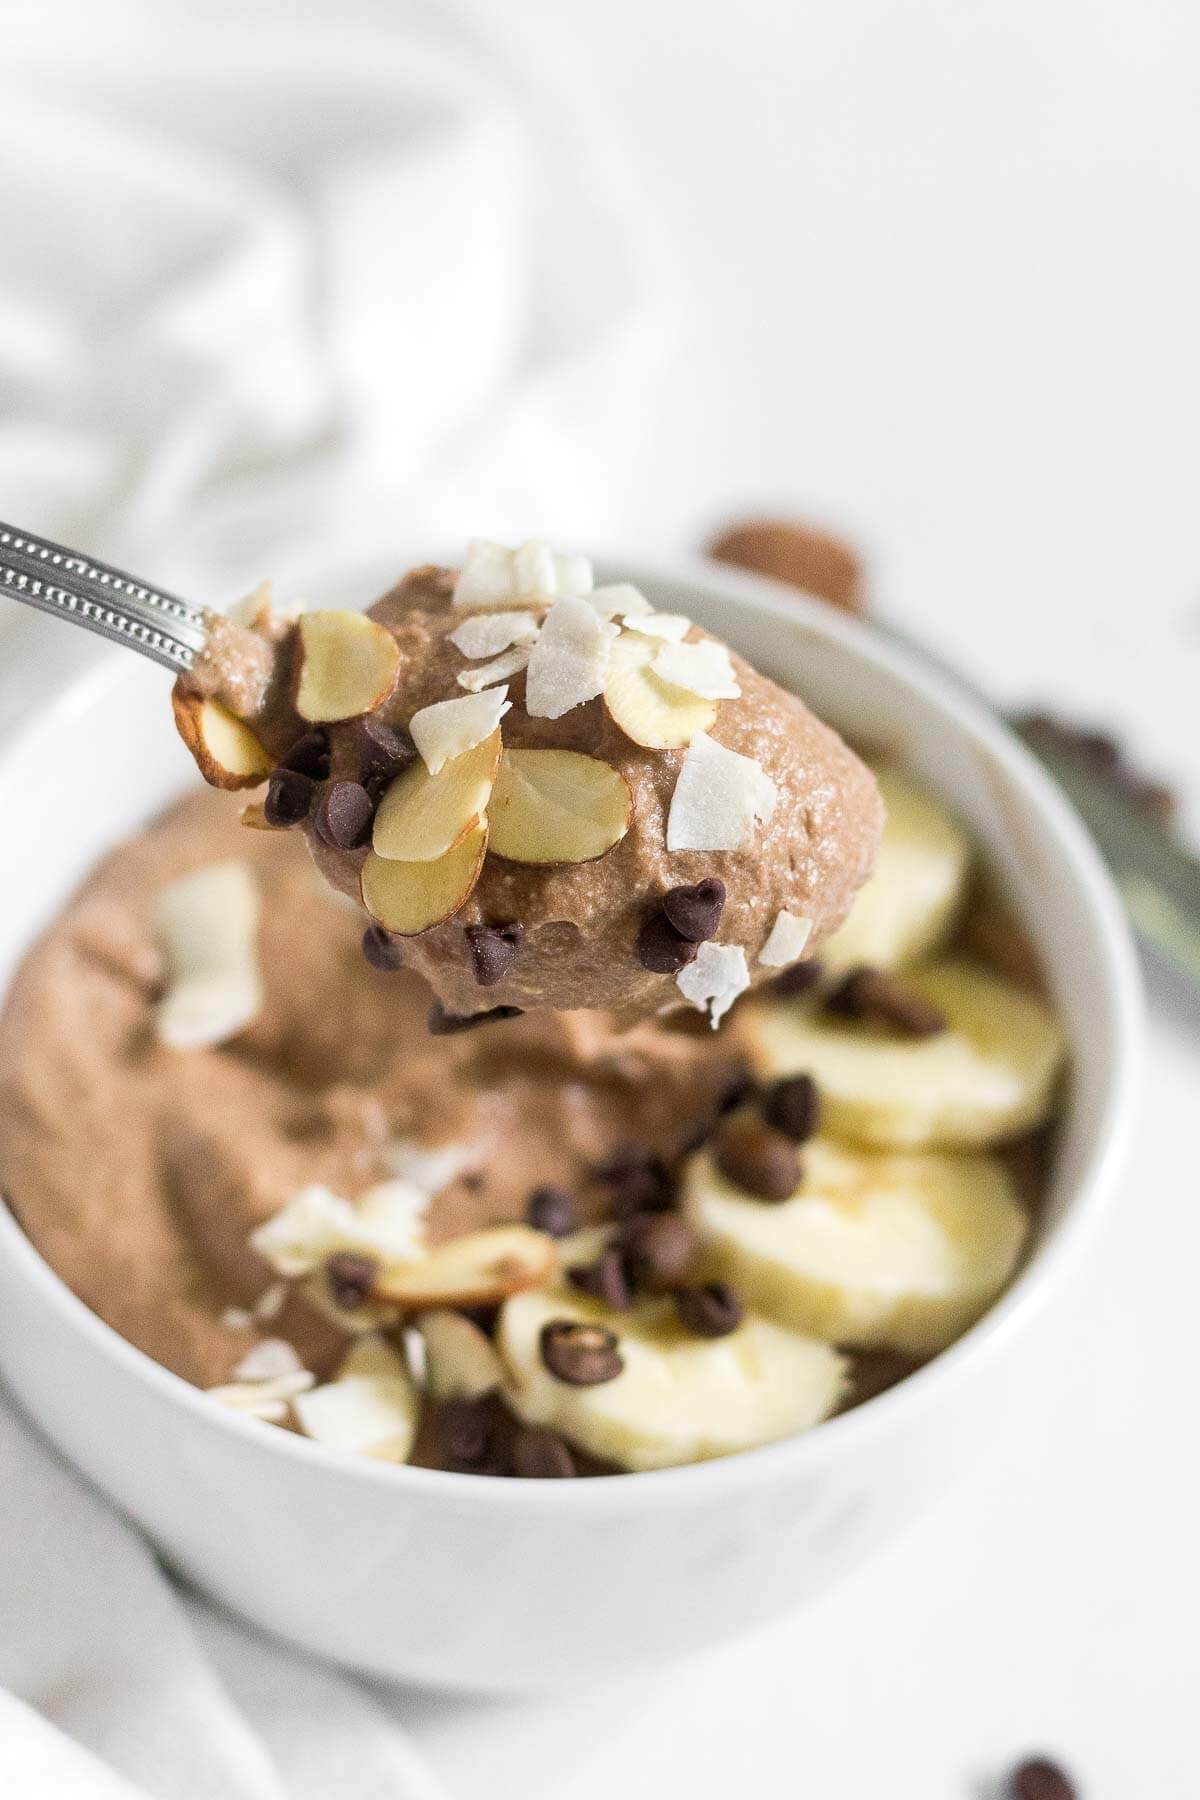 This mocha protein smoothie bowl has all your favorite breakfast flavors in one healthy bowl! It's rich, creamy and filled with chocolate and protein. You will love how easy it is to make!